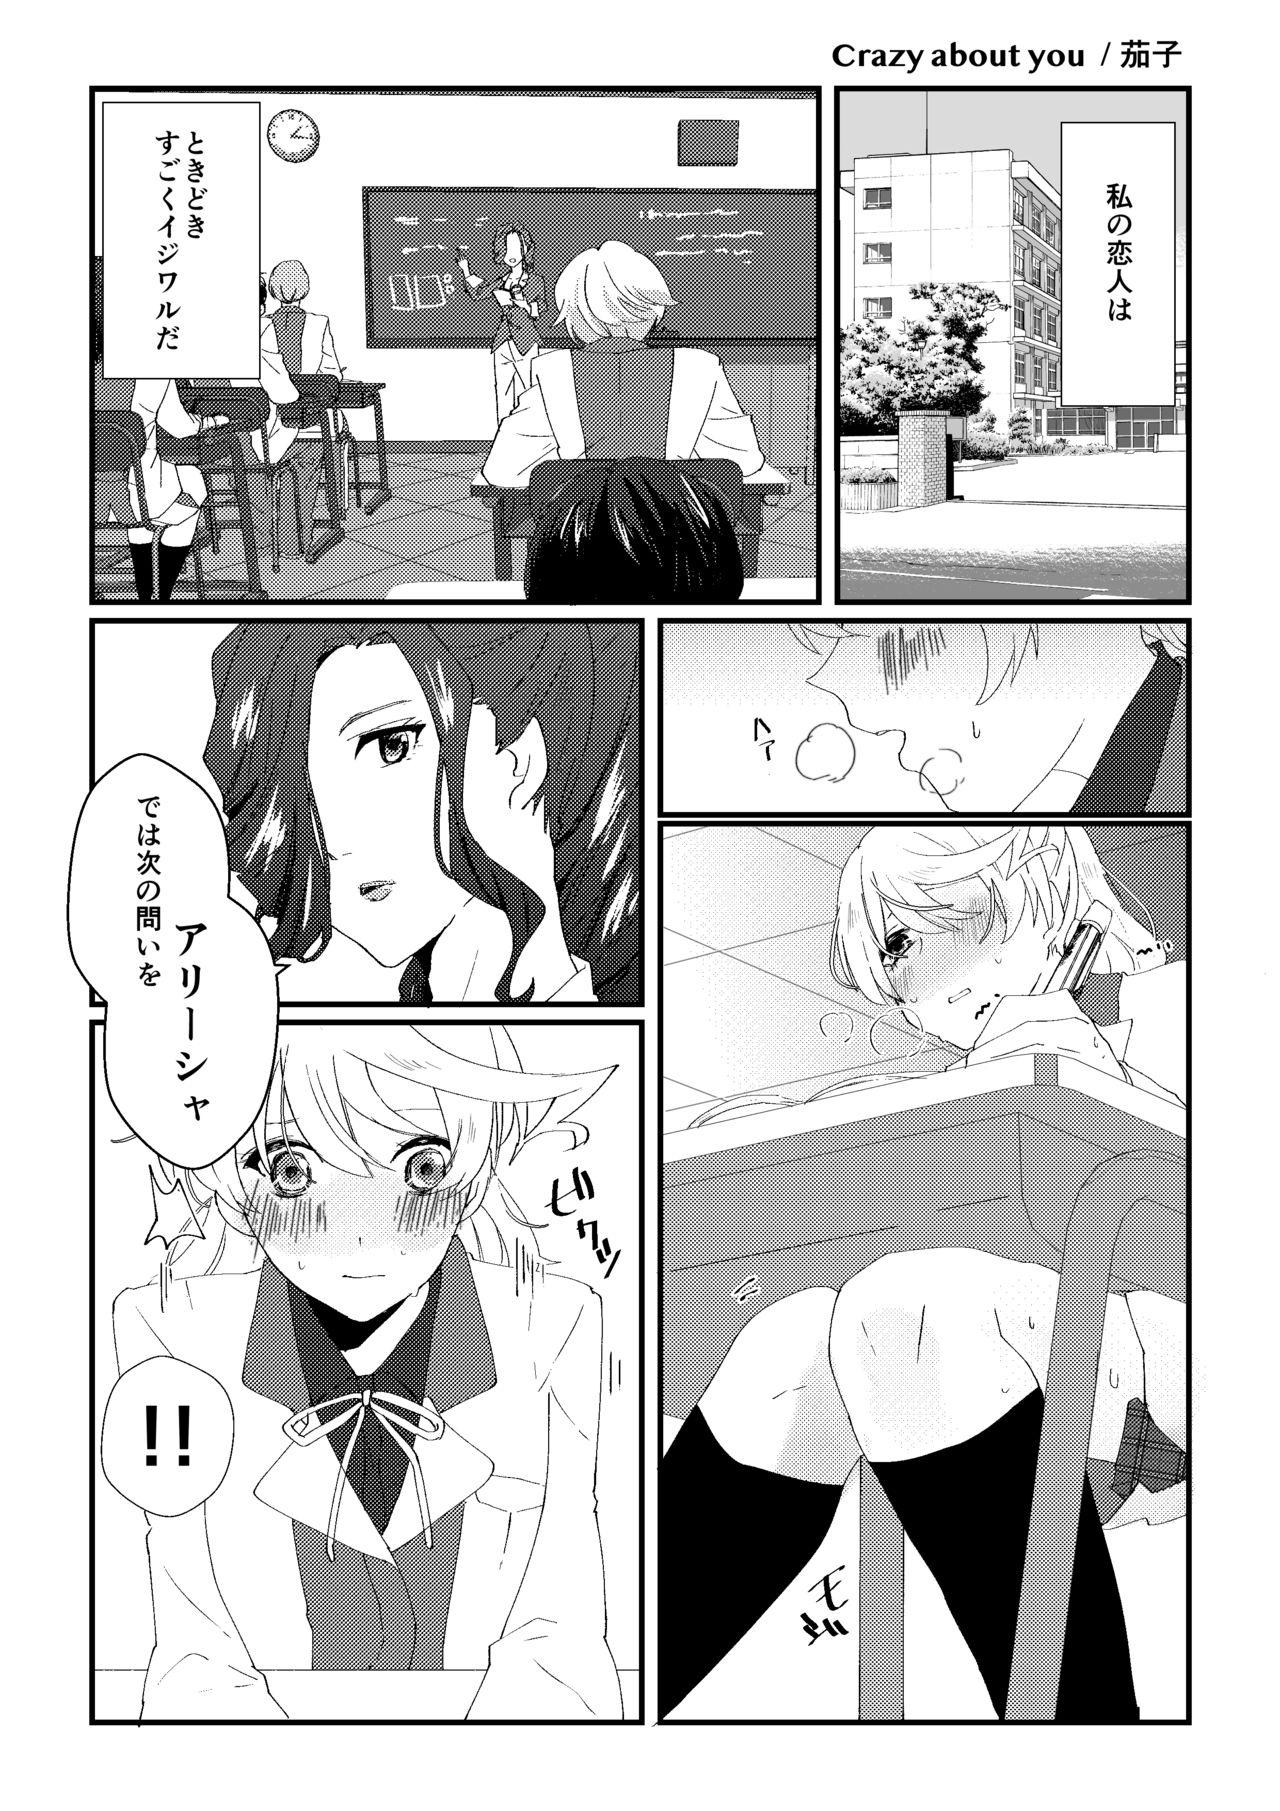 Horny Slut crazy about you - Tales of zestiria Ethnic - Page 2